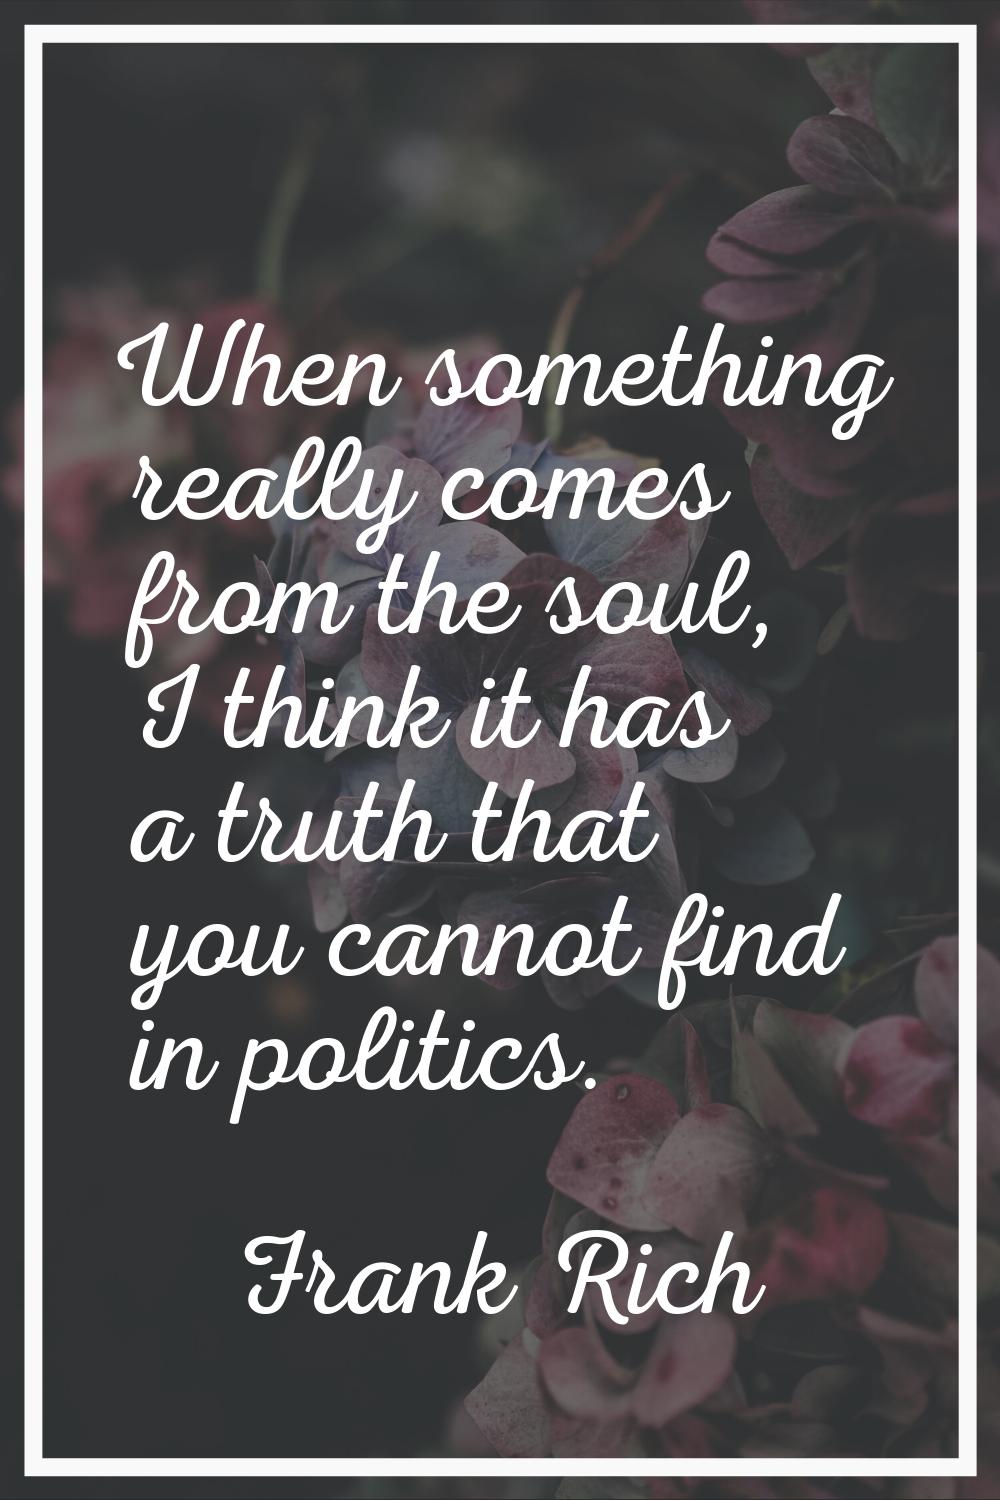 When something really comes from the soul, I think it has a truth that you cannot find in politics.